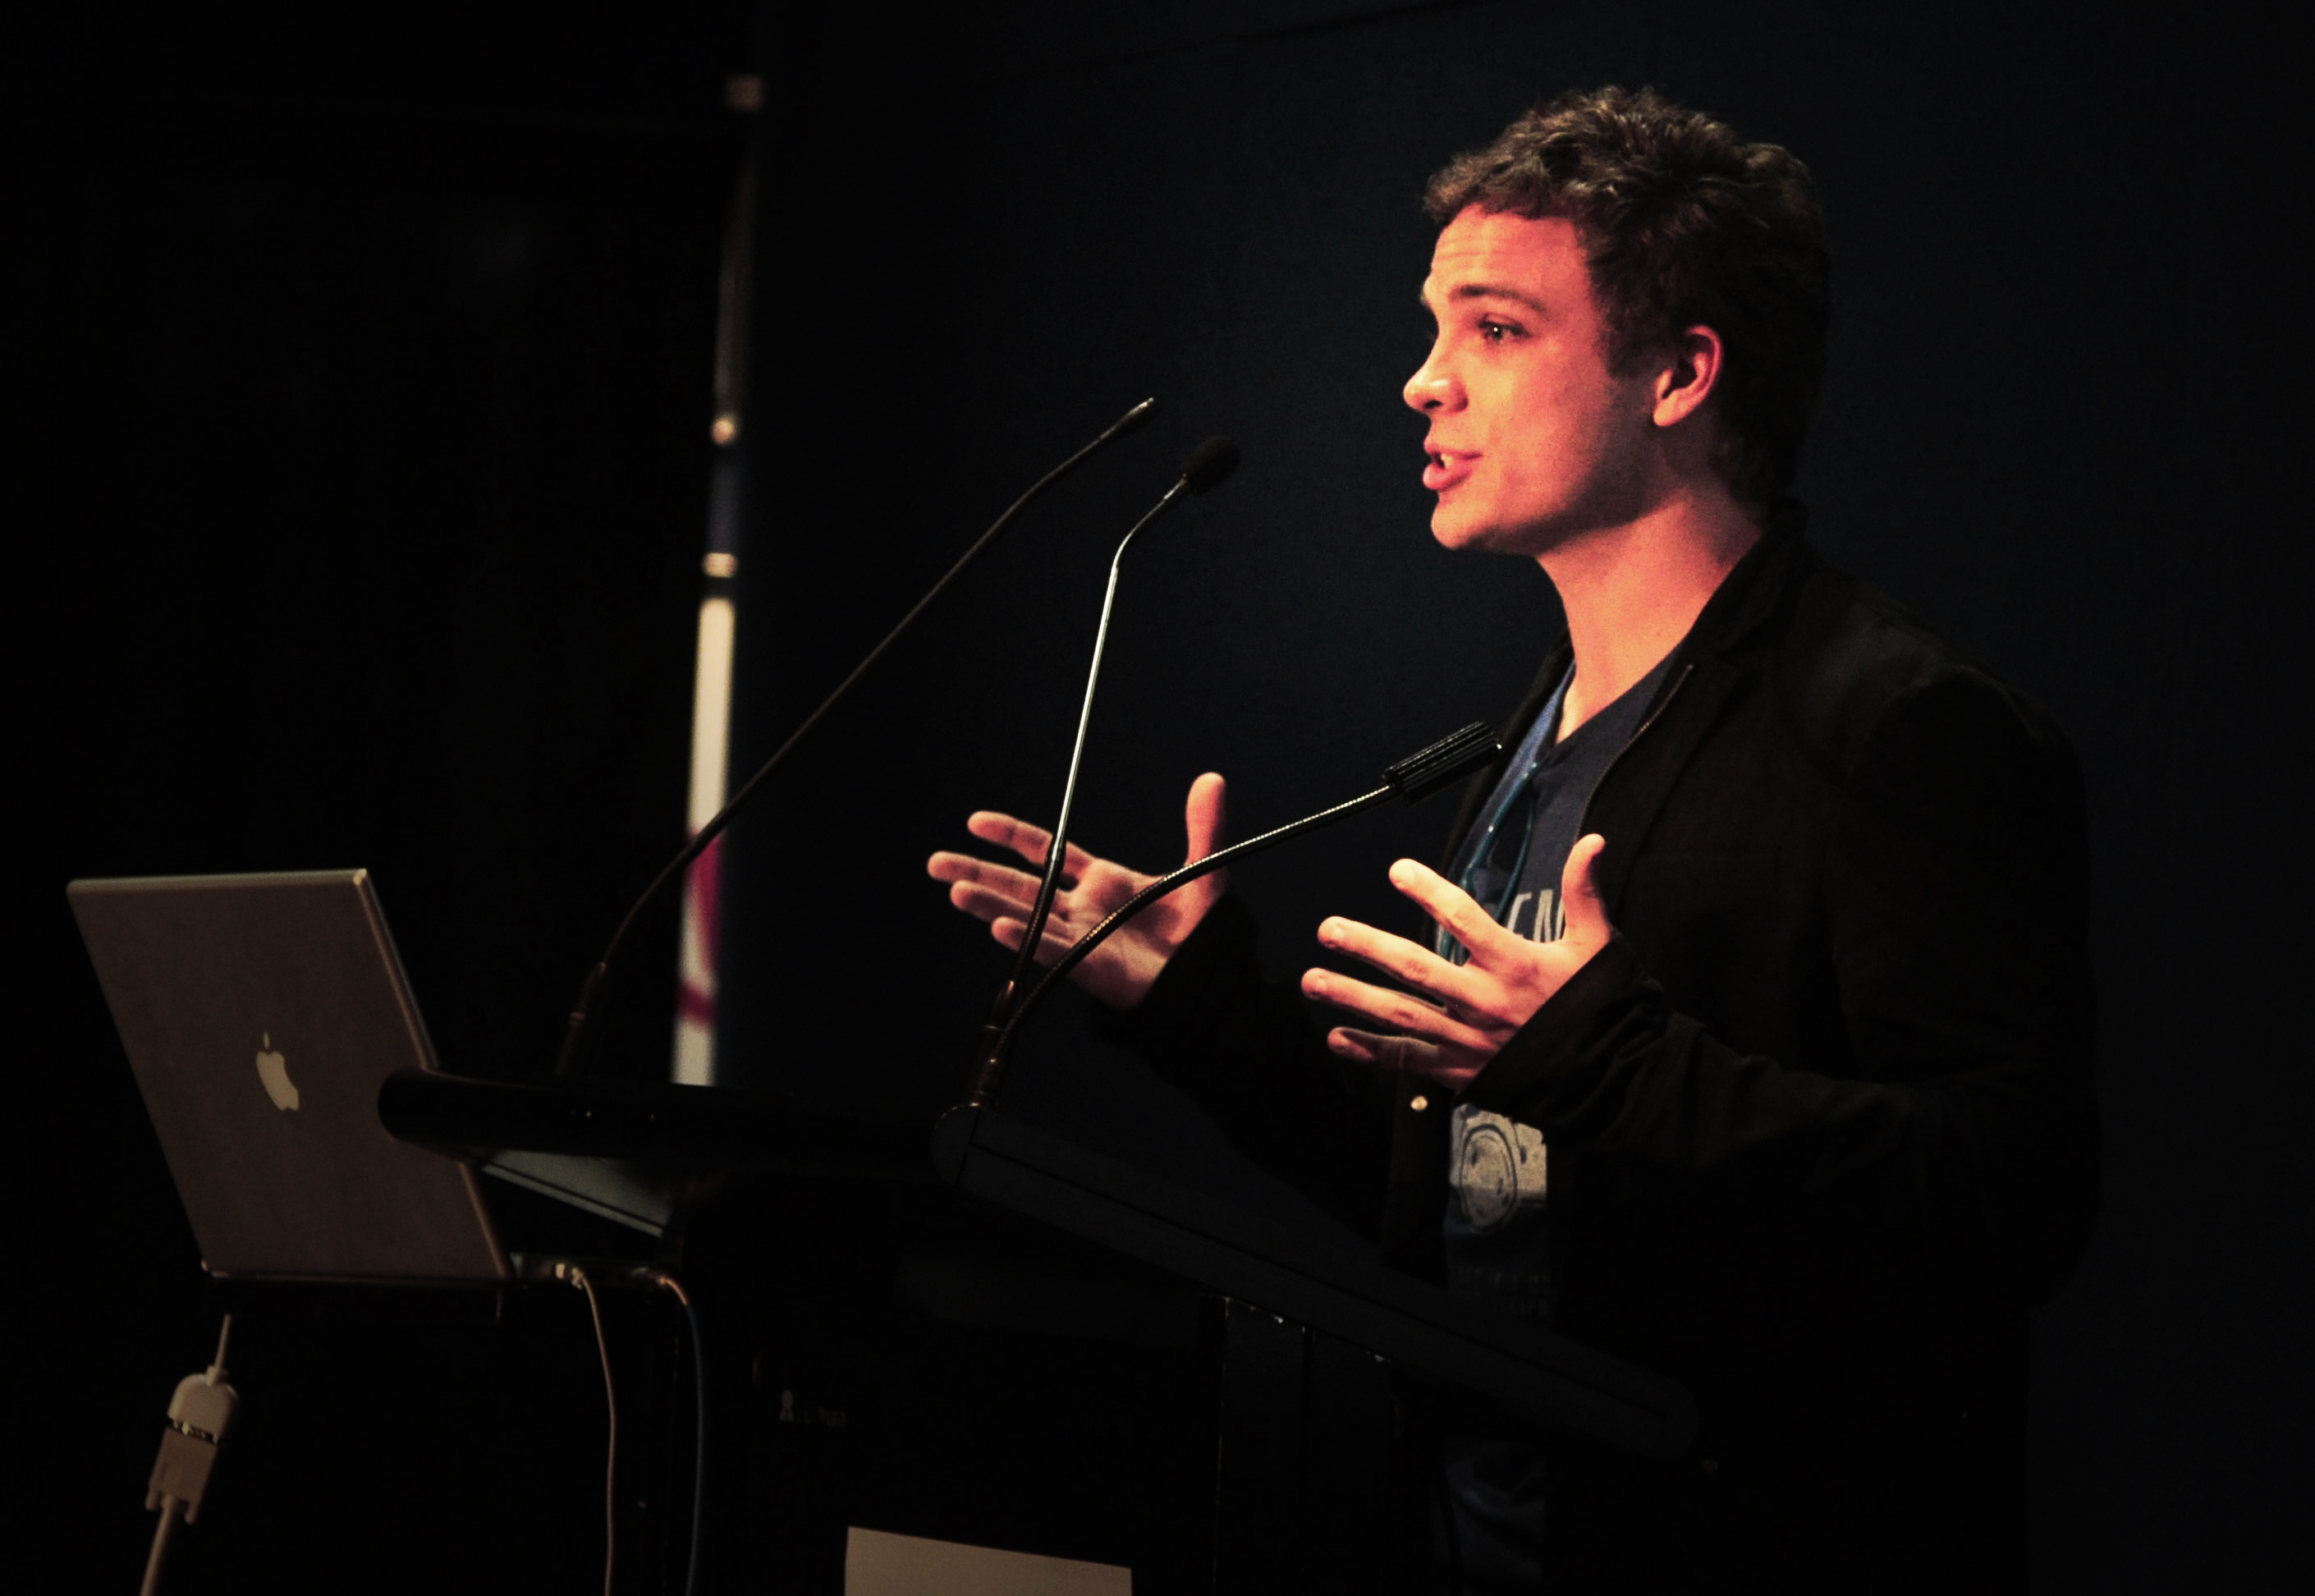 Julian Shaw is the youngest keynote speaker to appear for the Society of Motion Picture and Television Engineers at SMPTE09. Darling Harbour, Sydney, Australia.